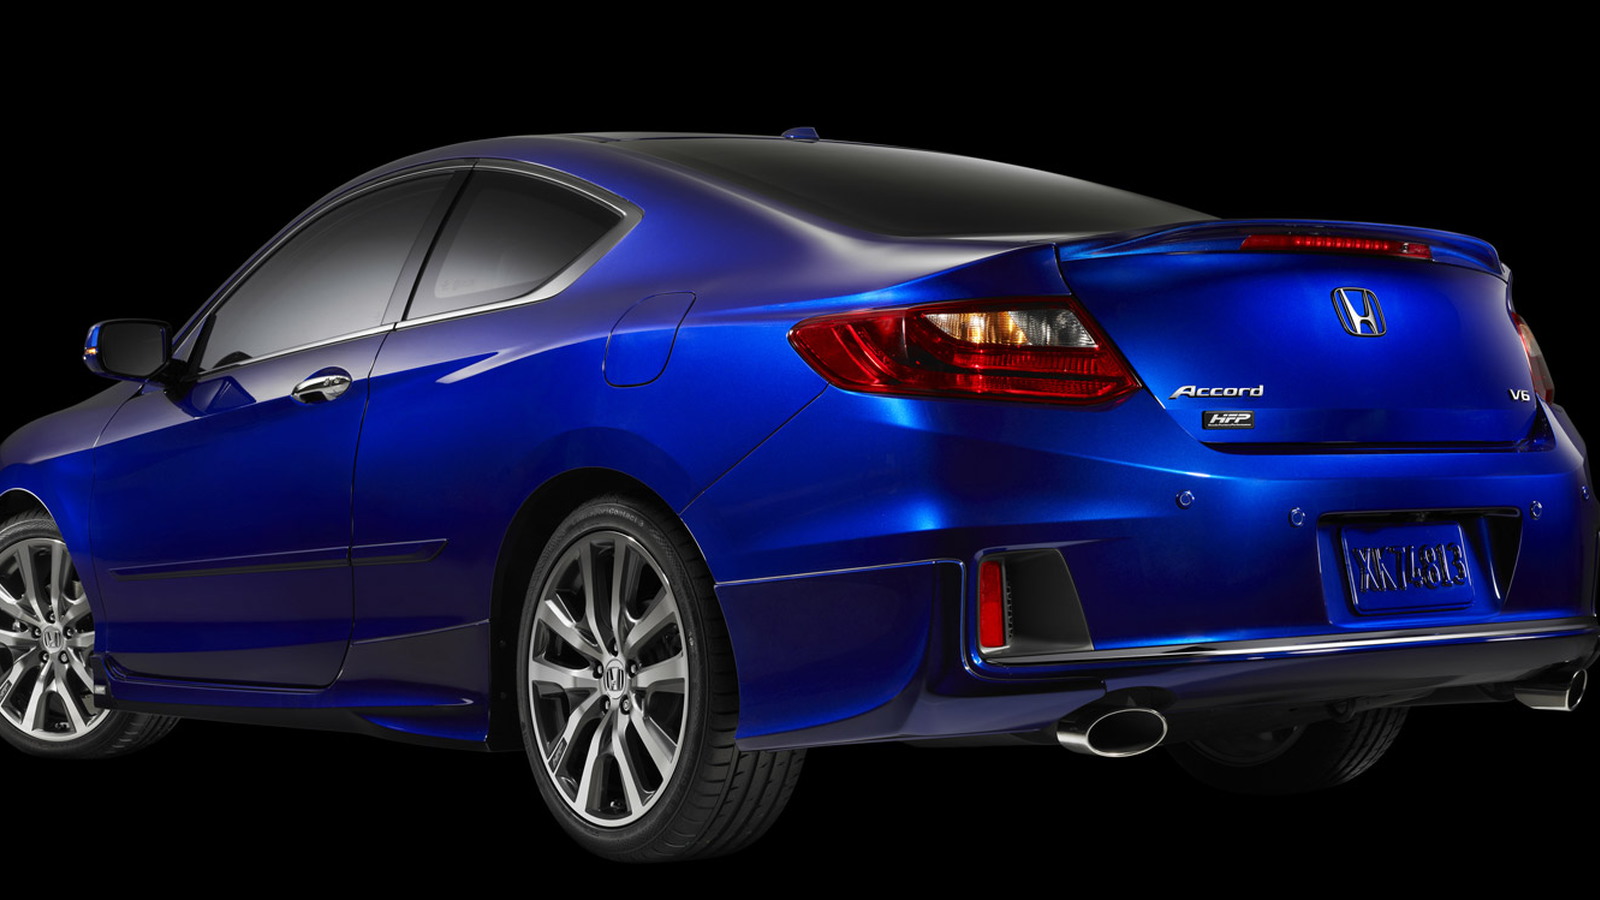 2013 Honda Accord Coupe fitted with Honda Factory Performance package